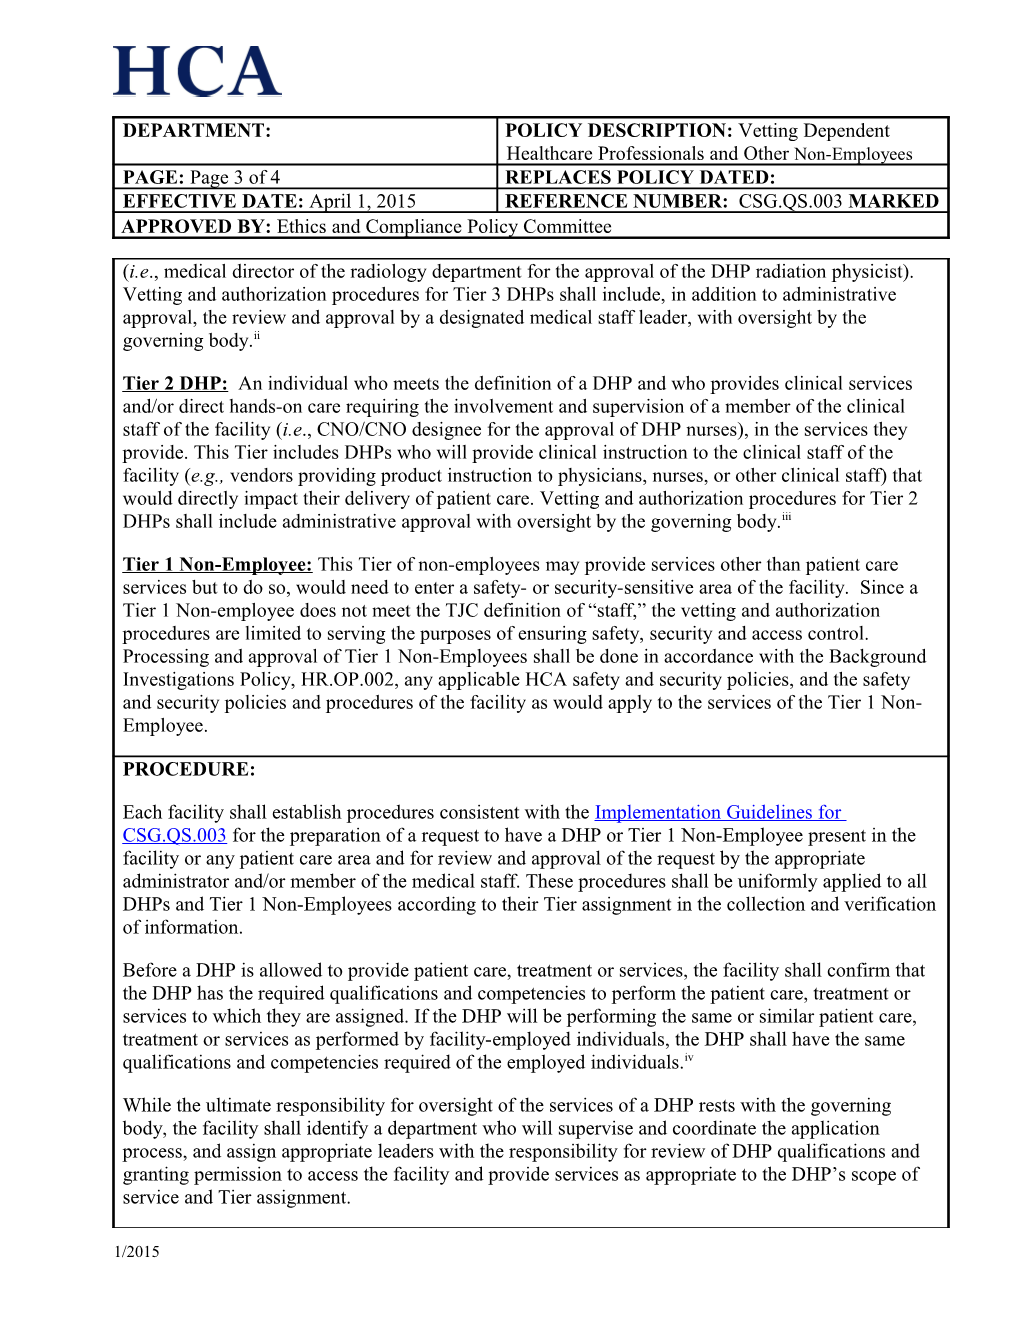 Iii the Joint Commission, LD.04.01.05, EP 1 5; NR.02.03.01, EP 6